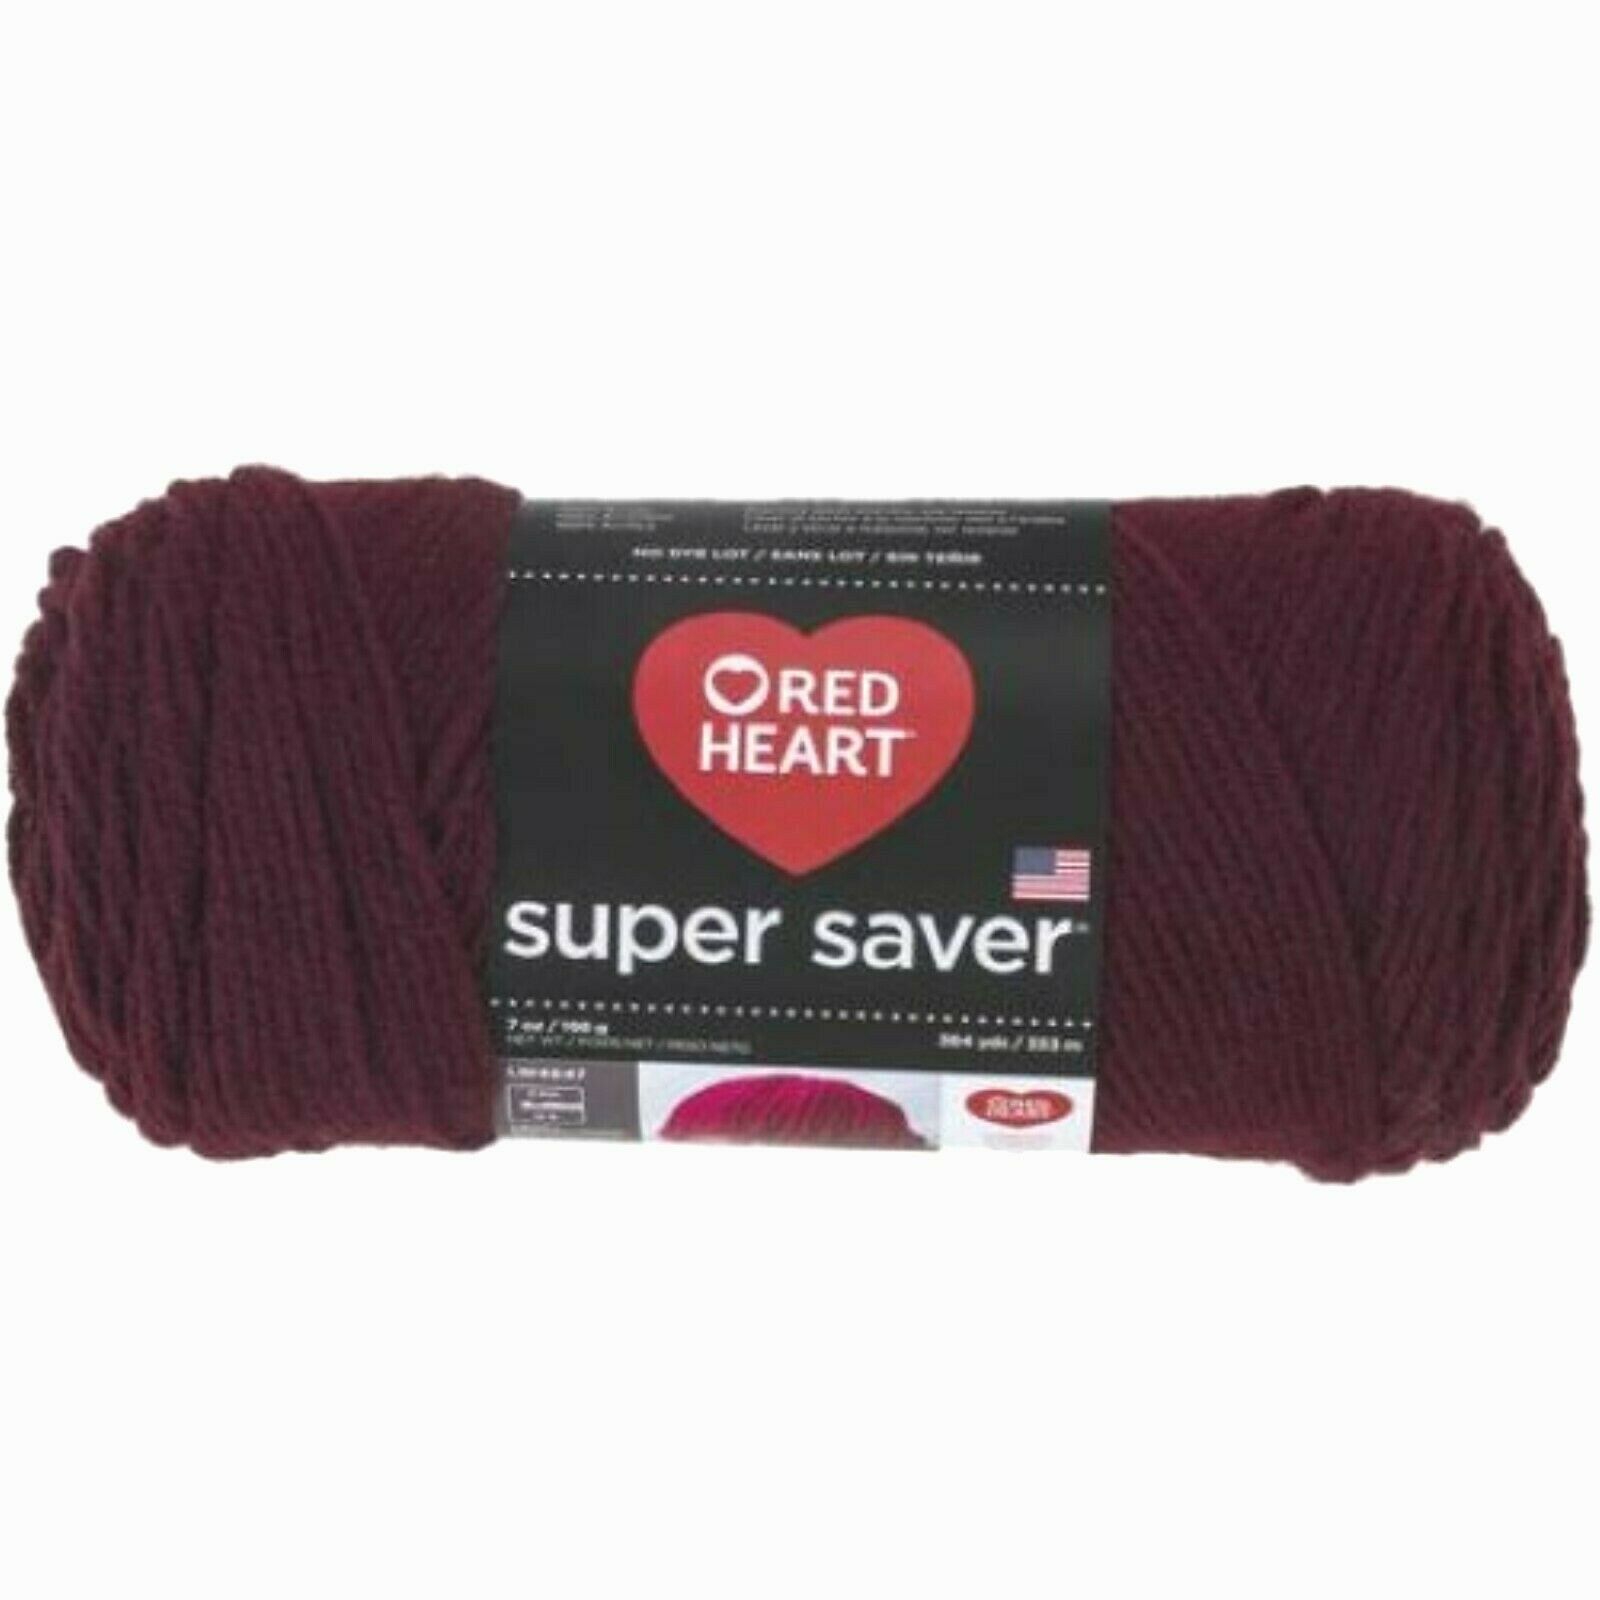 Red Heart Supersaver Yarn in Claret